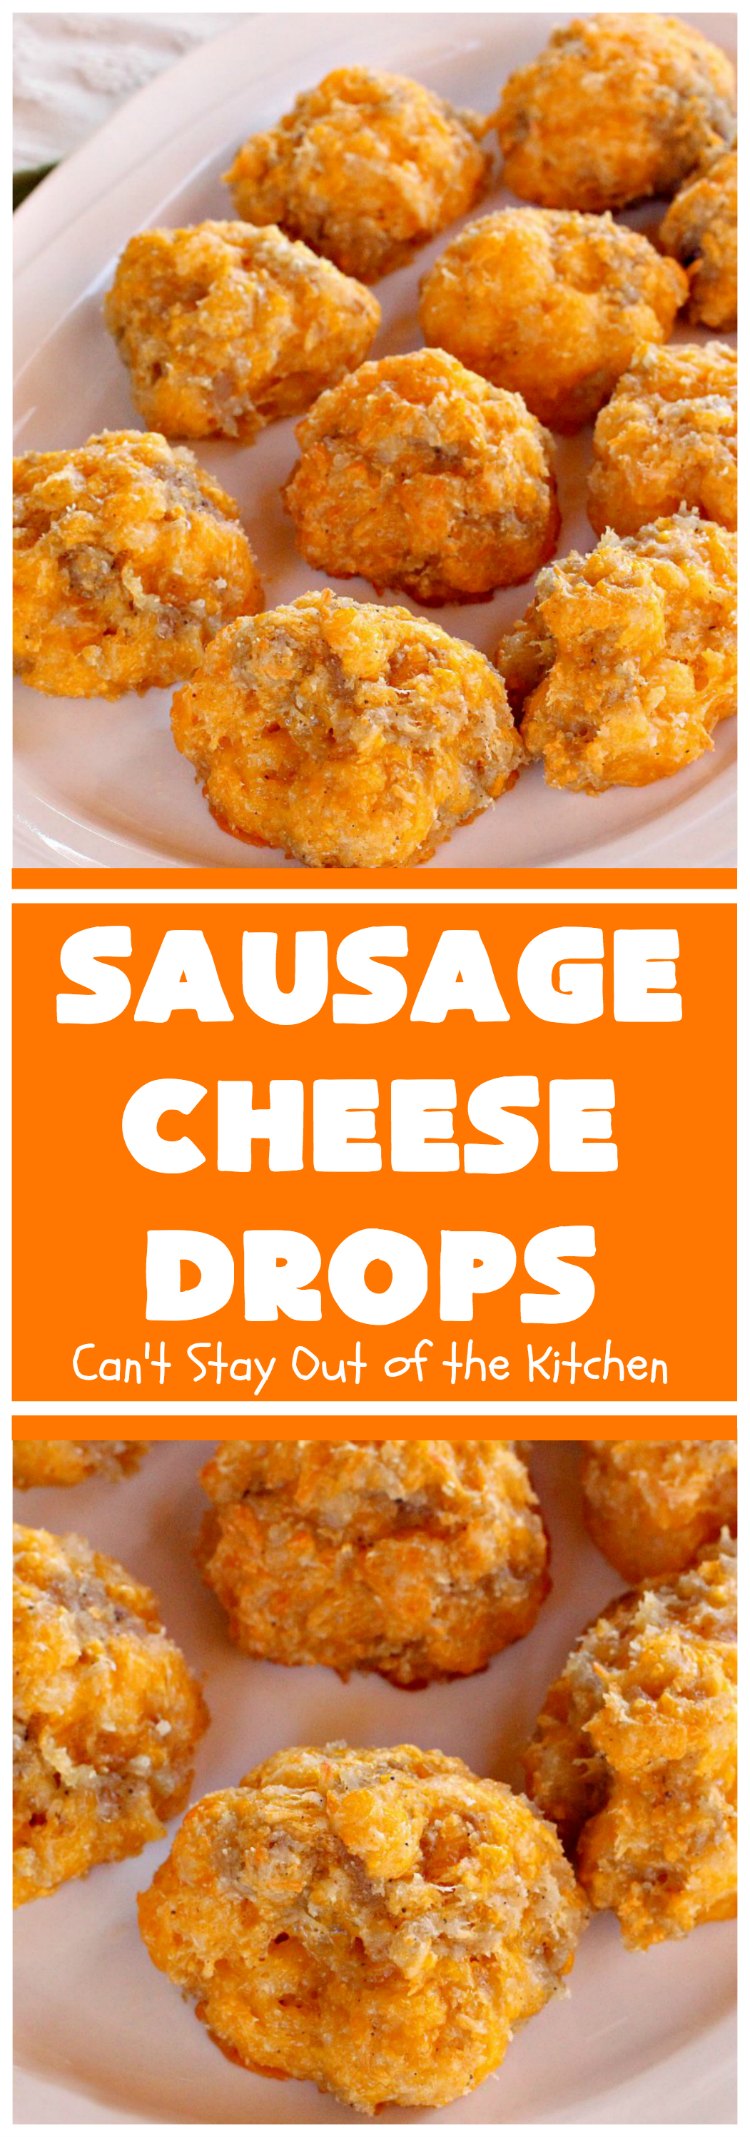 Sausage Cheese Drops | Can't Stay Out of the Kitchen